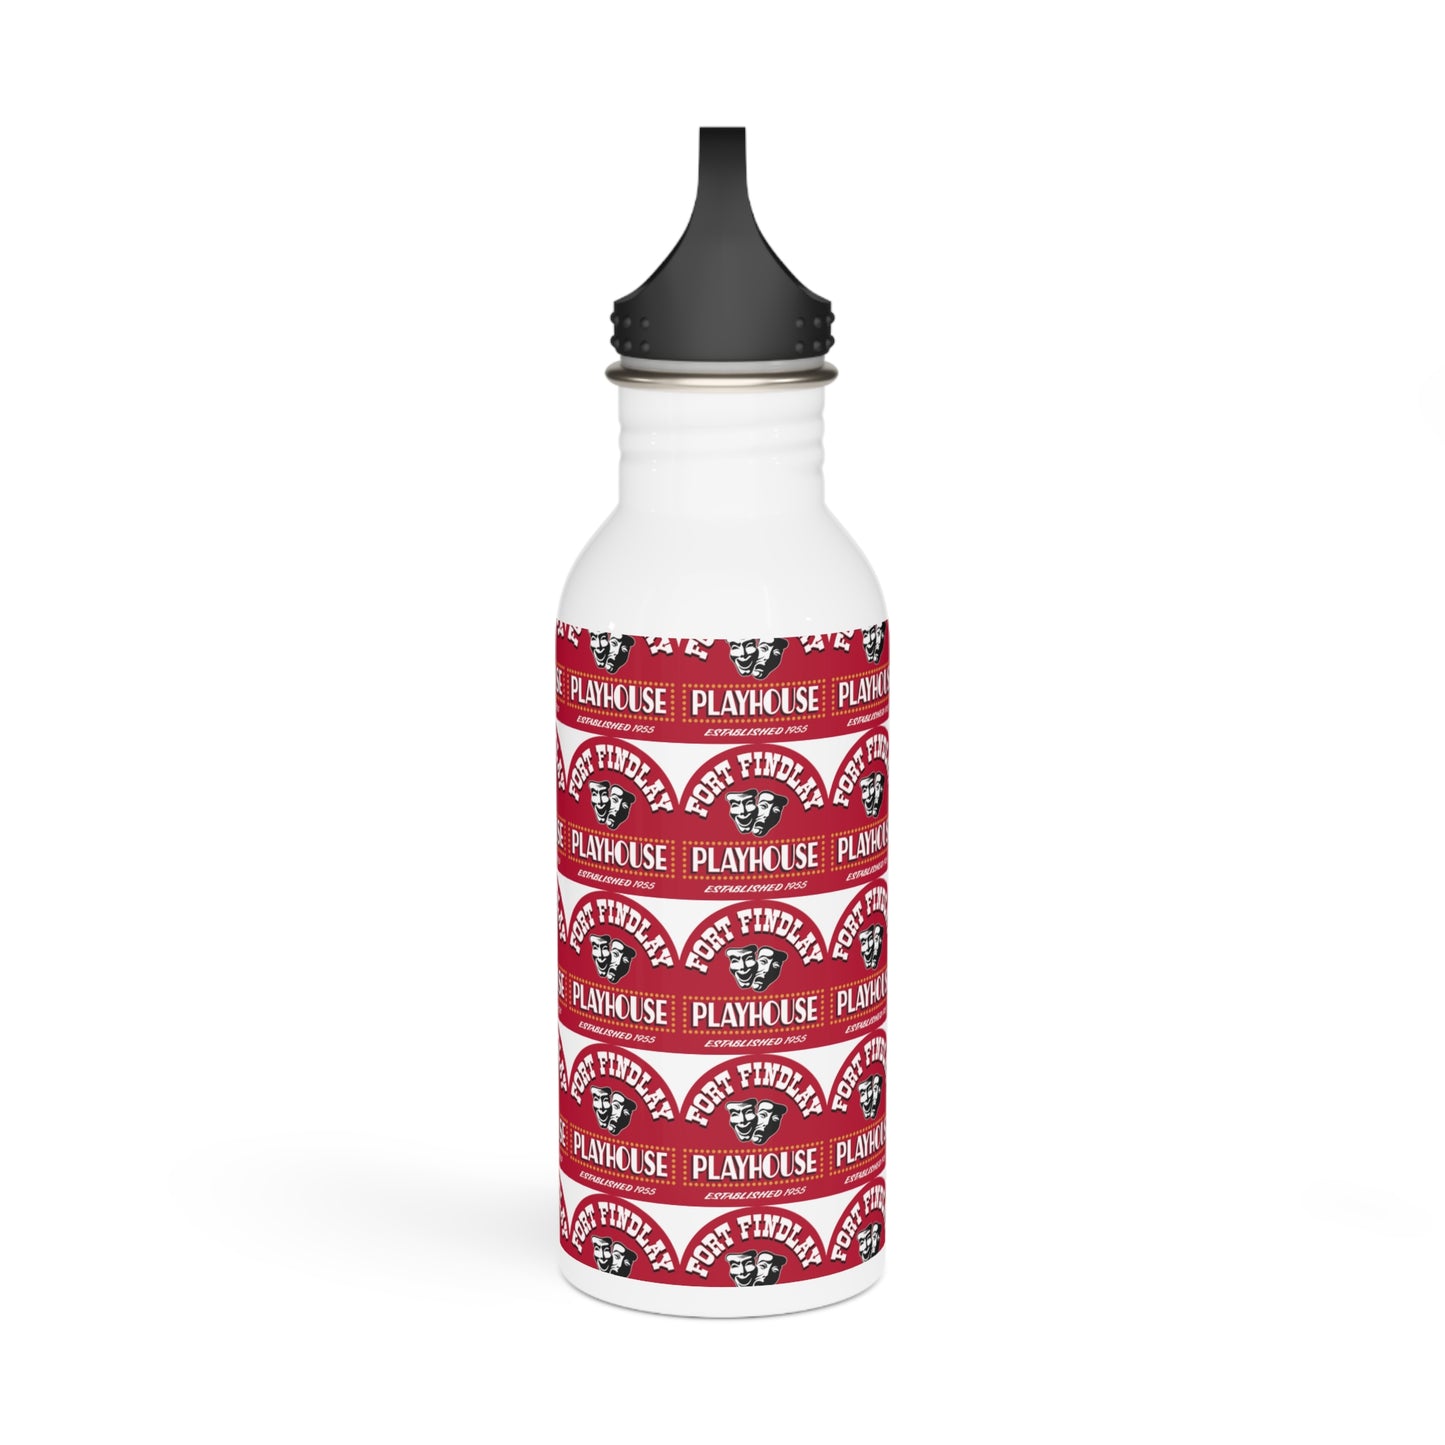 Fort Findlay Playhouse Stainless Steel Water Bottle